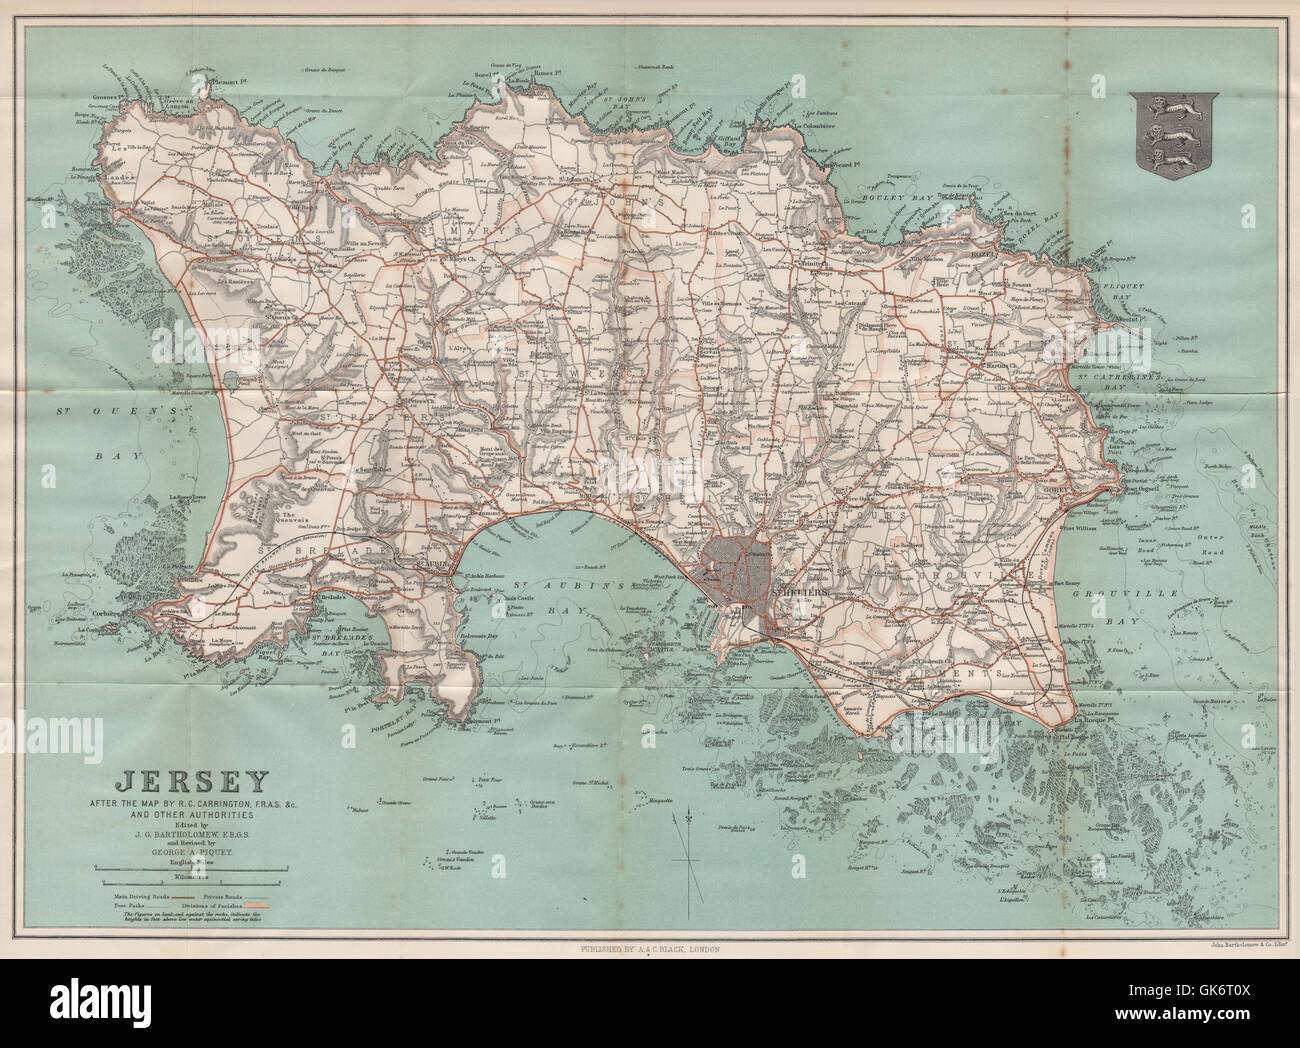 The island of JERSEY. St Helier. Channel Islands, 1913 antique map Stock Photo